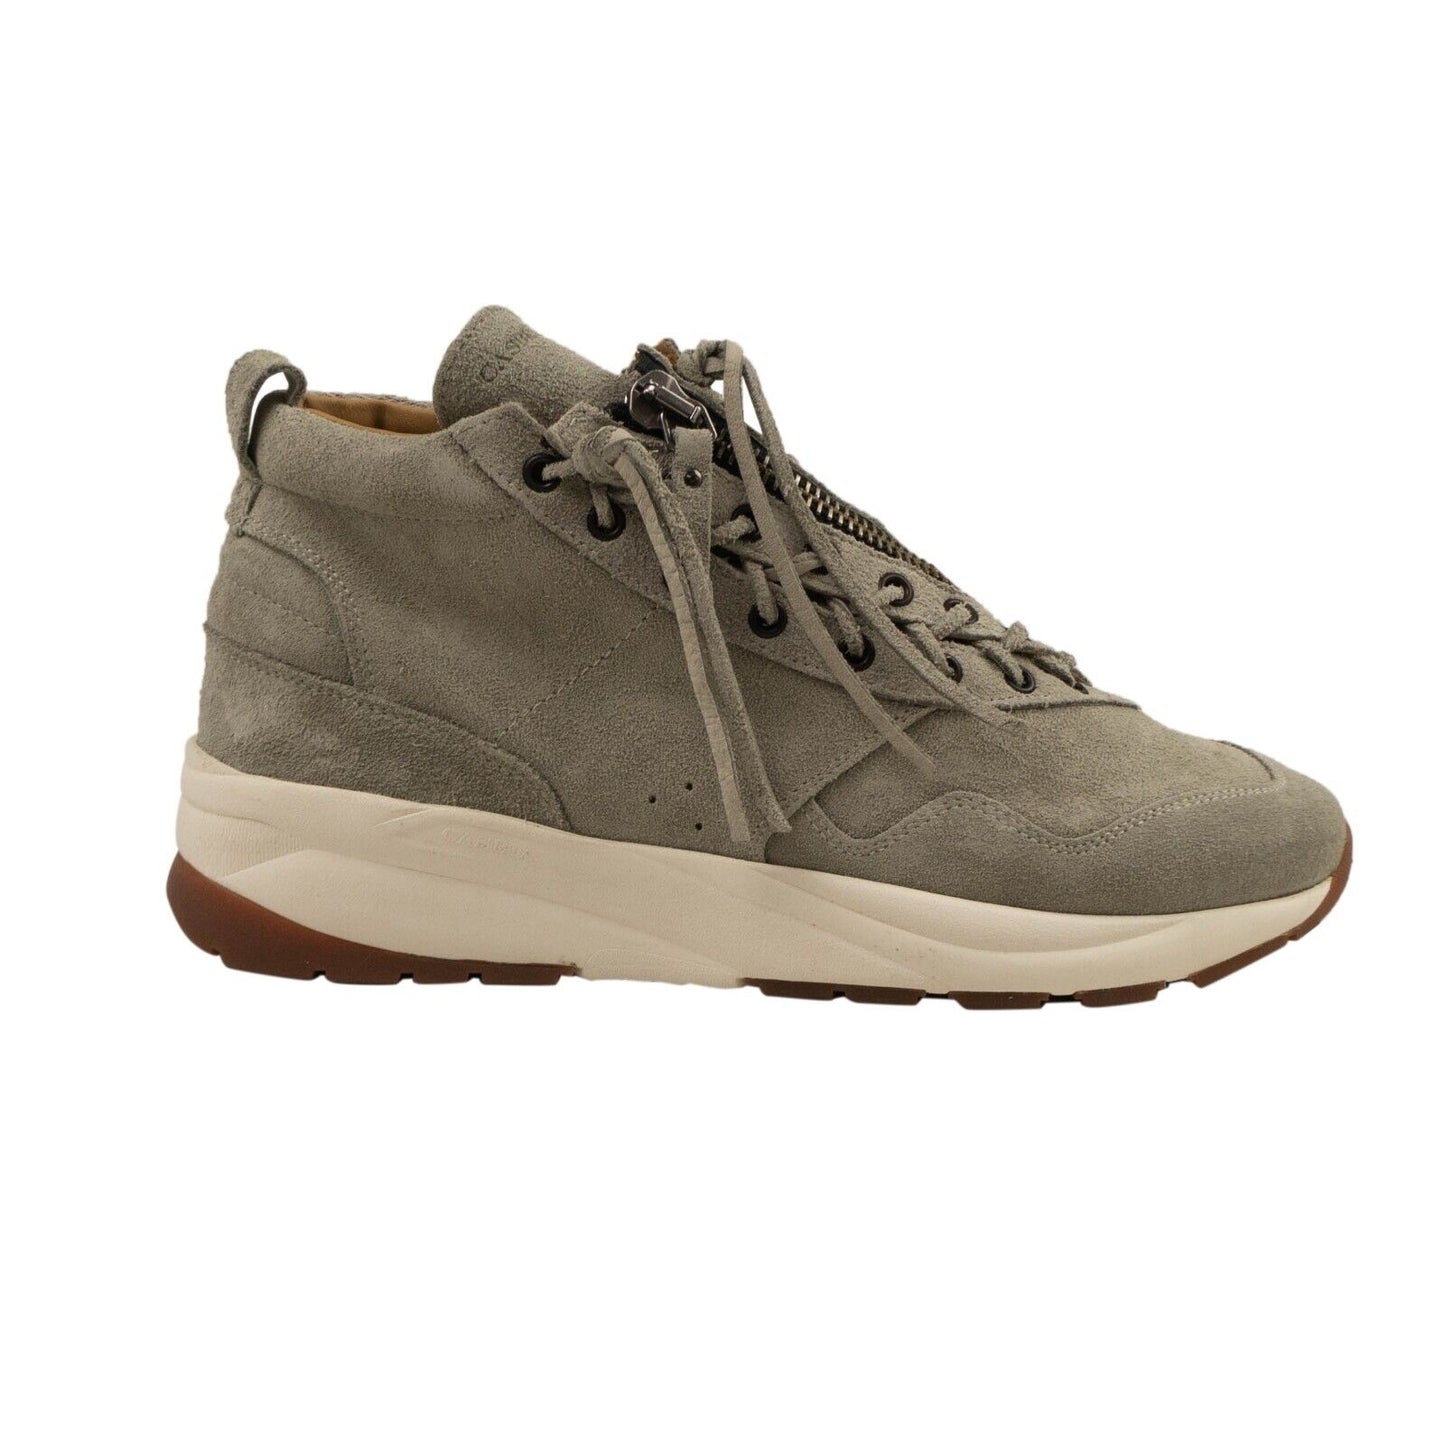 Casbia Awol Ap Sneakers - Sand